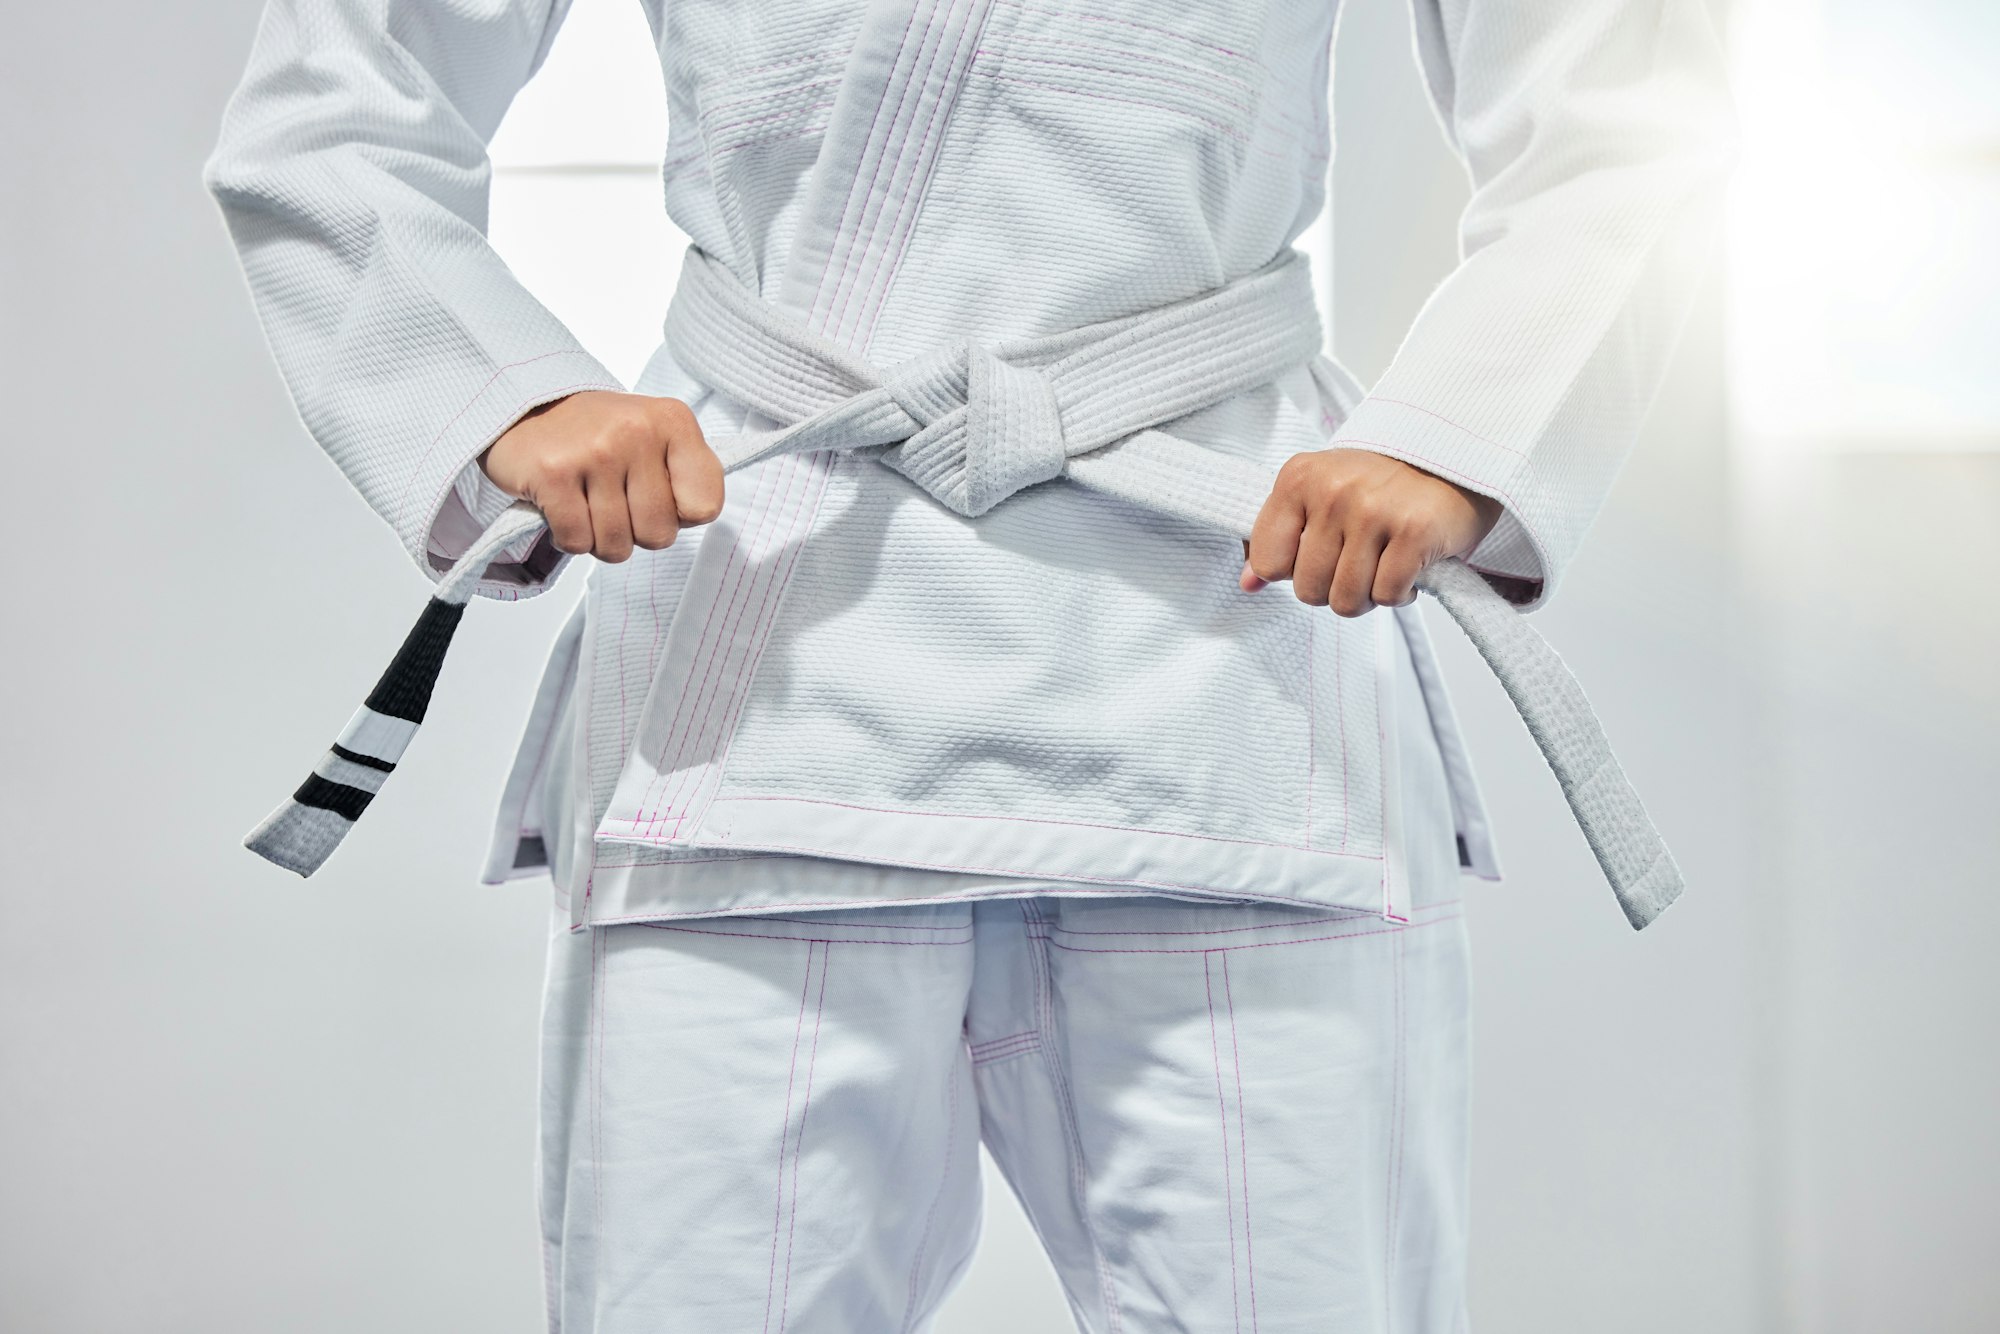 karate belt, martial arts and woman ready for fight battle, white dojo training or fitness challeng